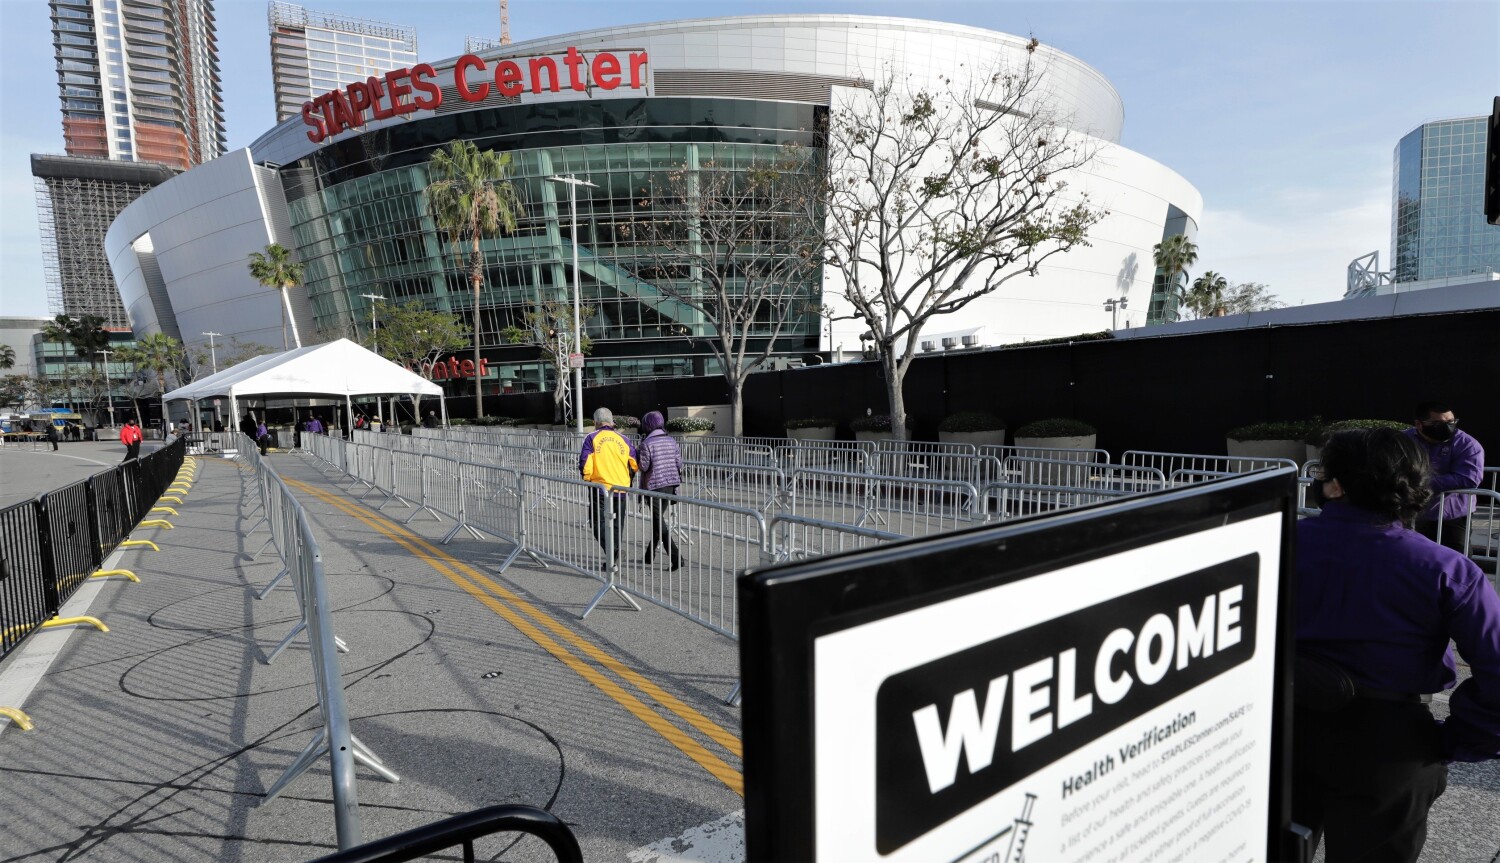 Exclusive: Lakers extend Staples Center lease for 20 years